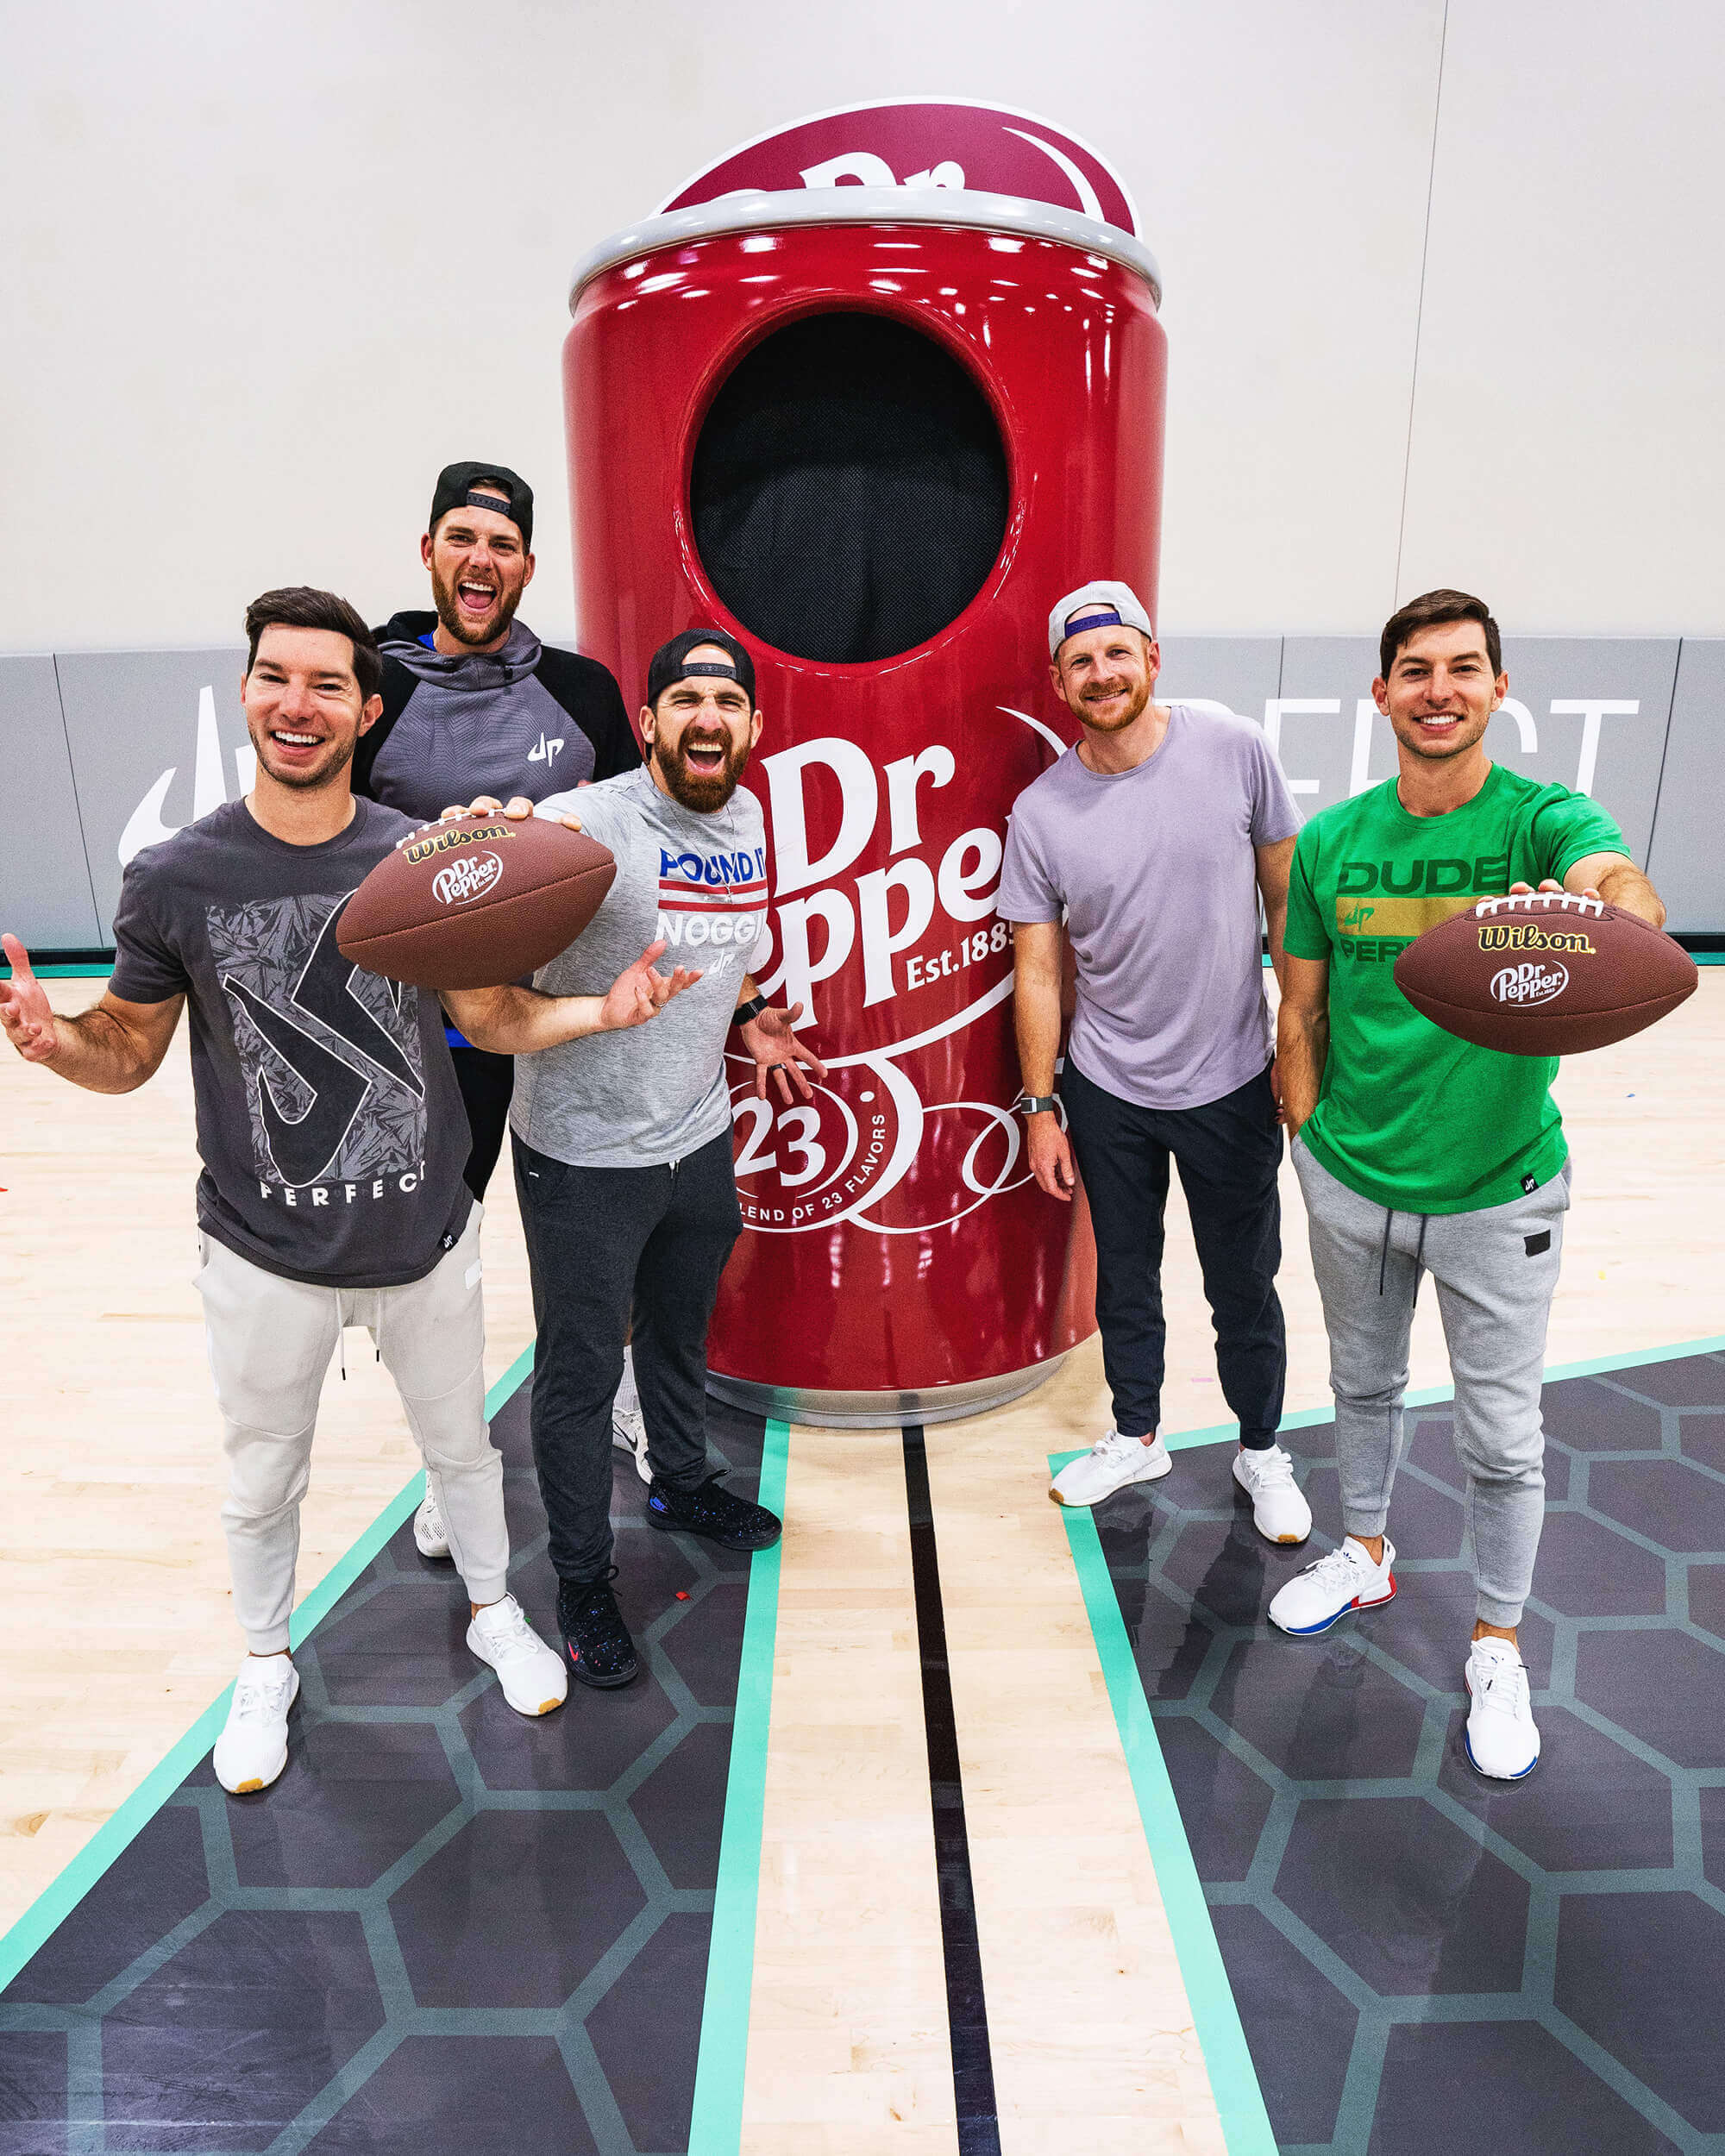 iD Tech Partners with  Sensation Dude Perfect in Three